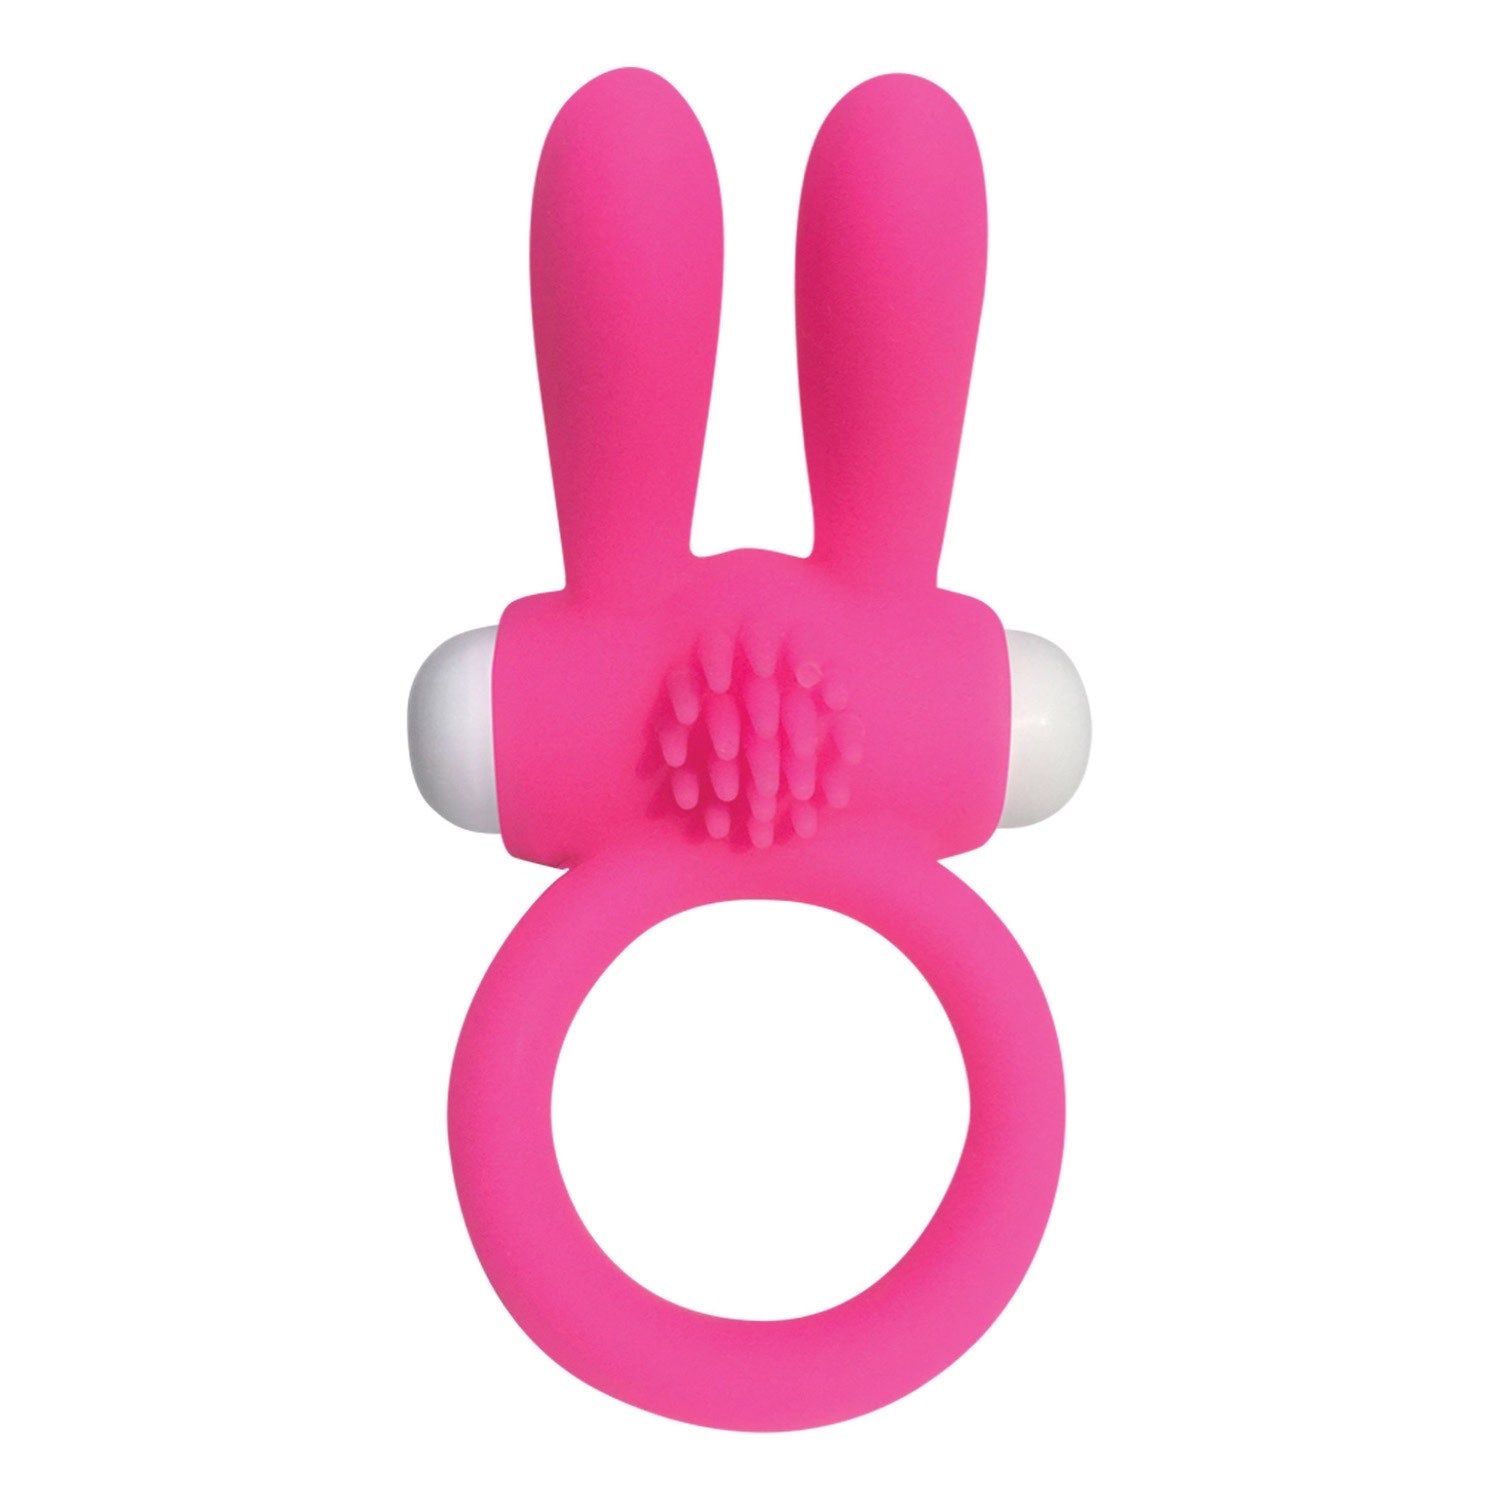  Neon Rabbit Ring - Pink Vibrating Cock Ring by Pipedream